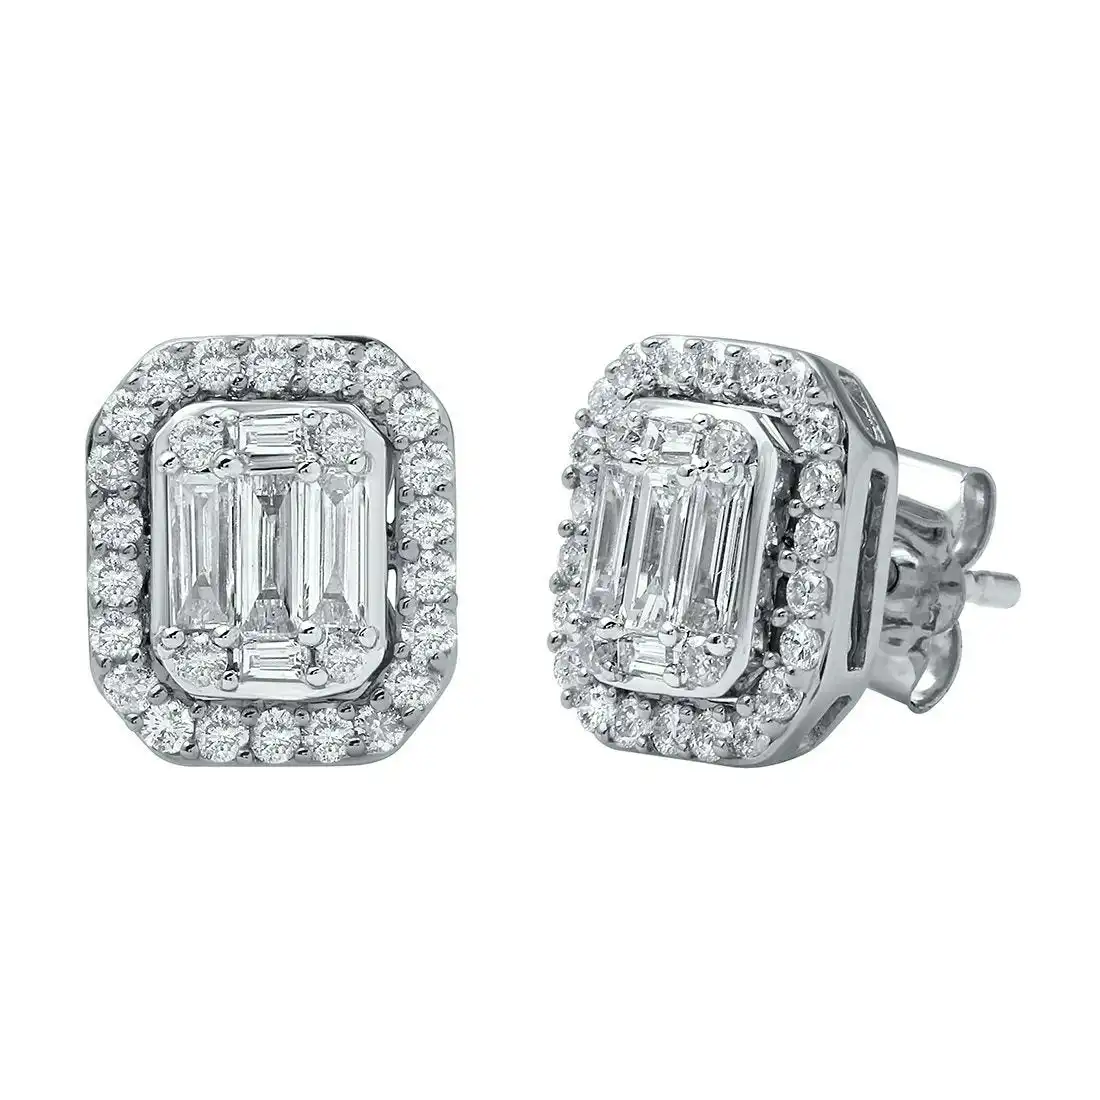 Brilliant Emerald Stud Earrings with 3/4ct of Diamonds in 9ct White Gold